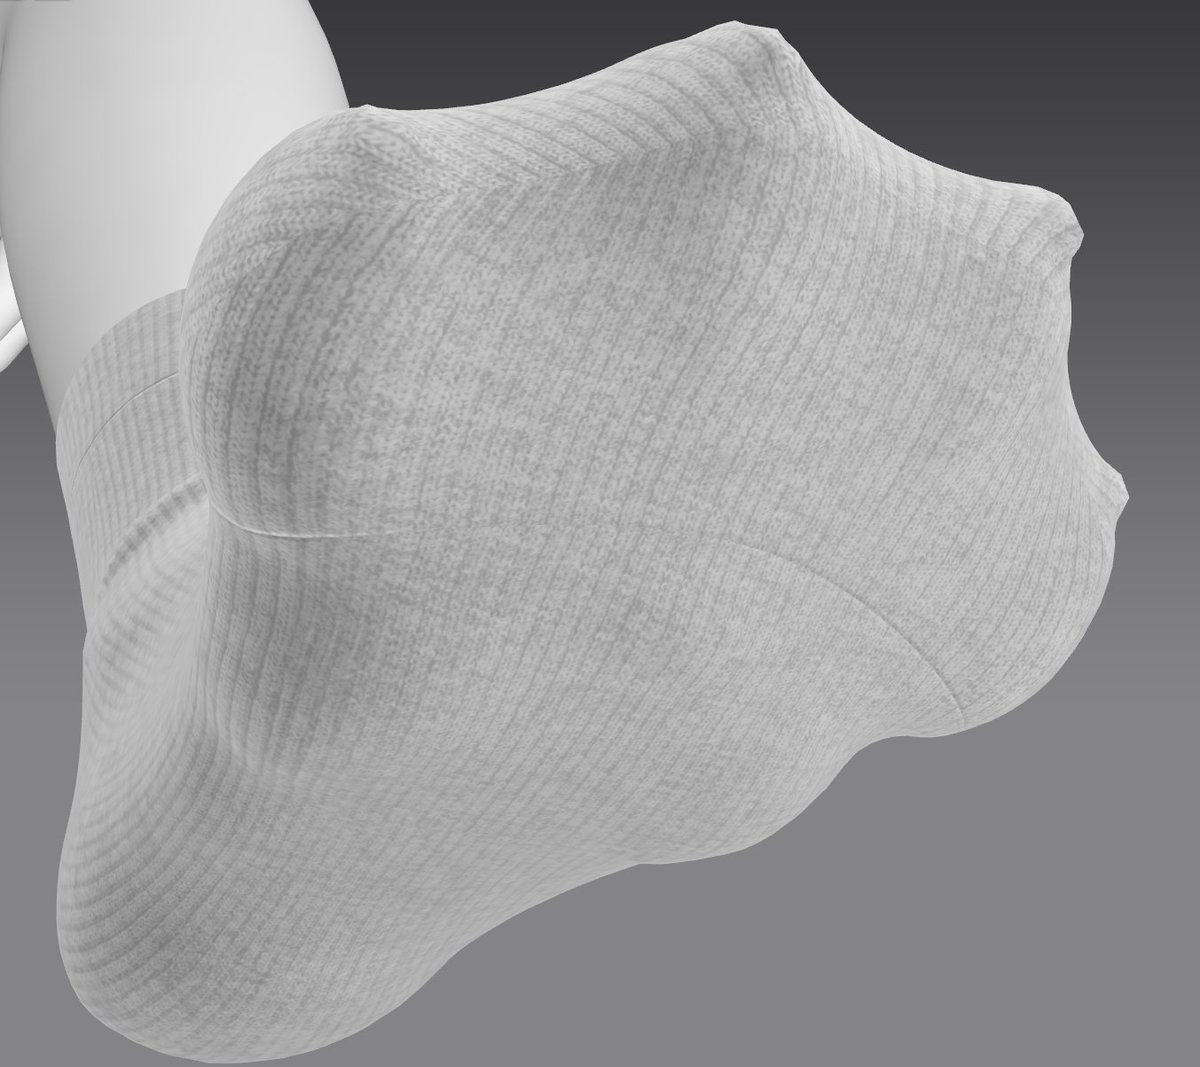 socked paws >w<''''''';;;; marvelous designer has a great cloth sim, i'd like to use it for underwear scenarios as well ...!